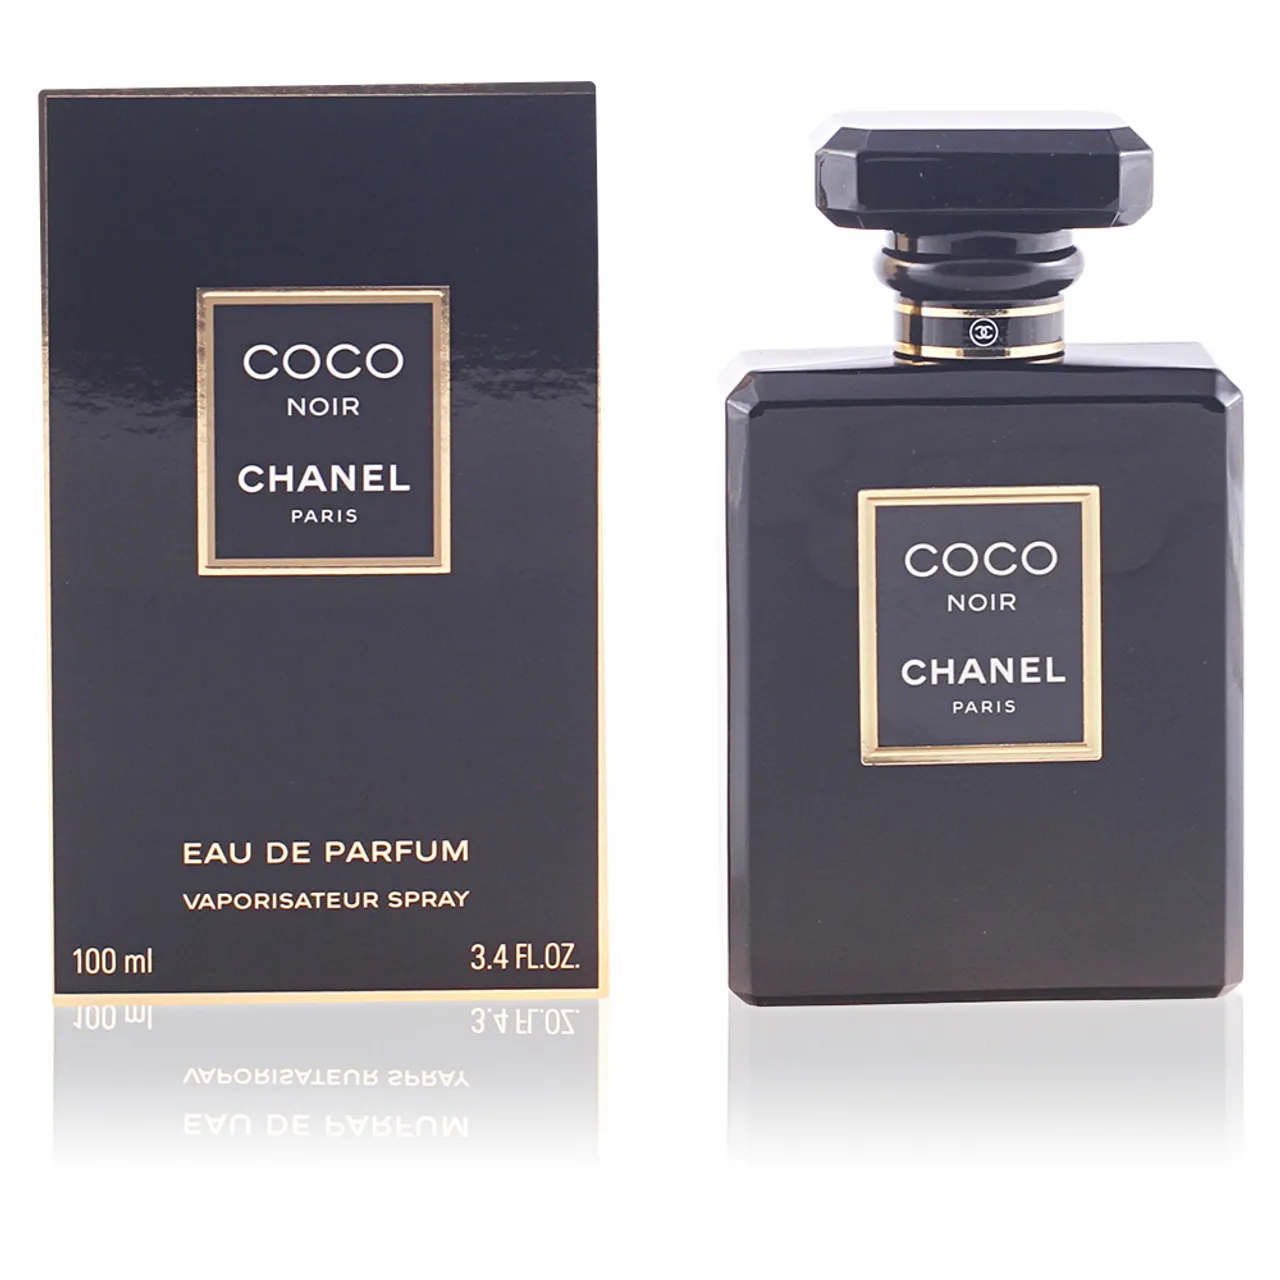 Chanel collection at 25 Discount  Kenya Perfume Parlour  Facebook